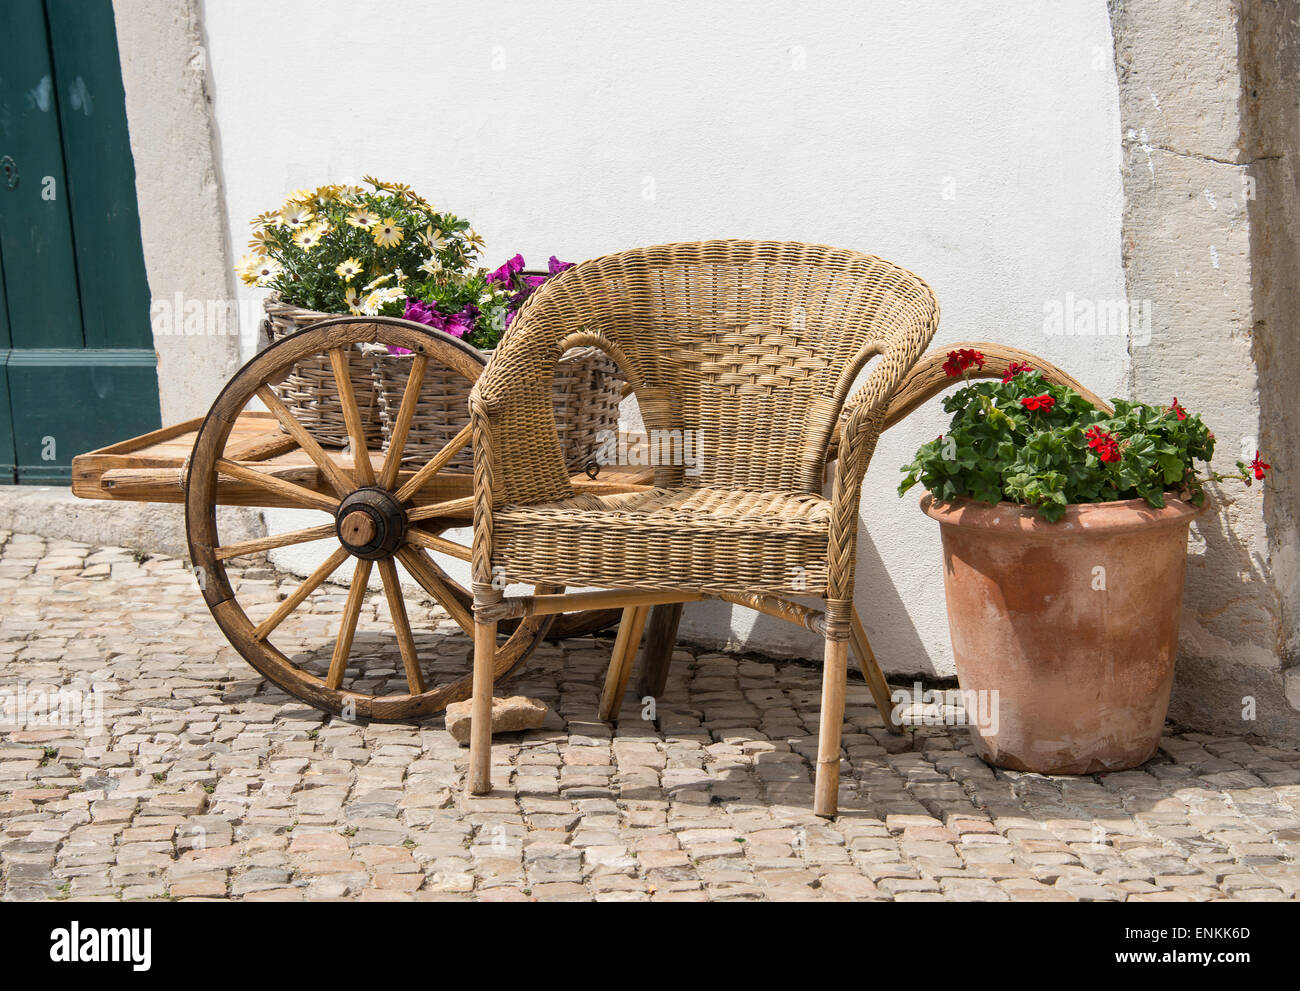 street in village in algarve portugal with flowers and wagon wheel car Stock Photo